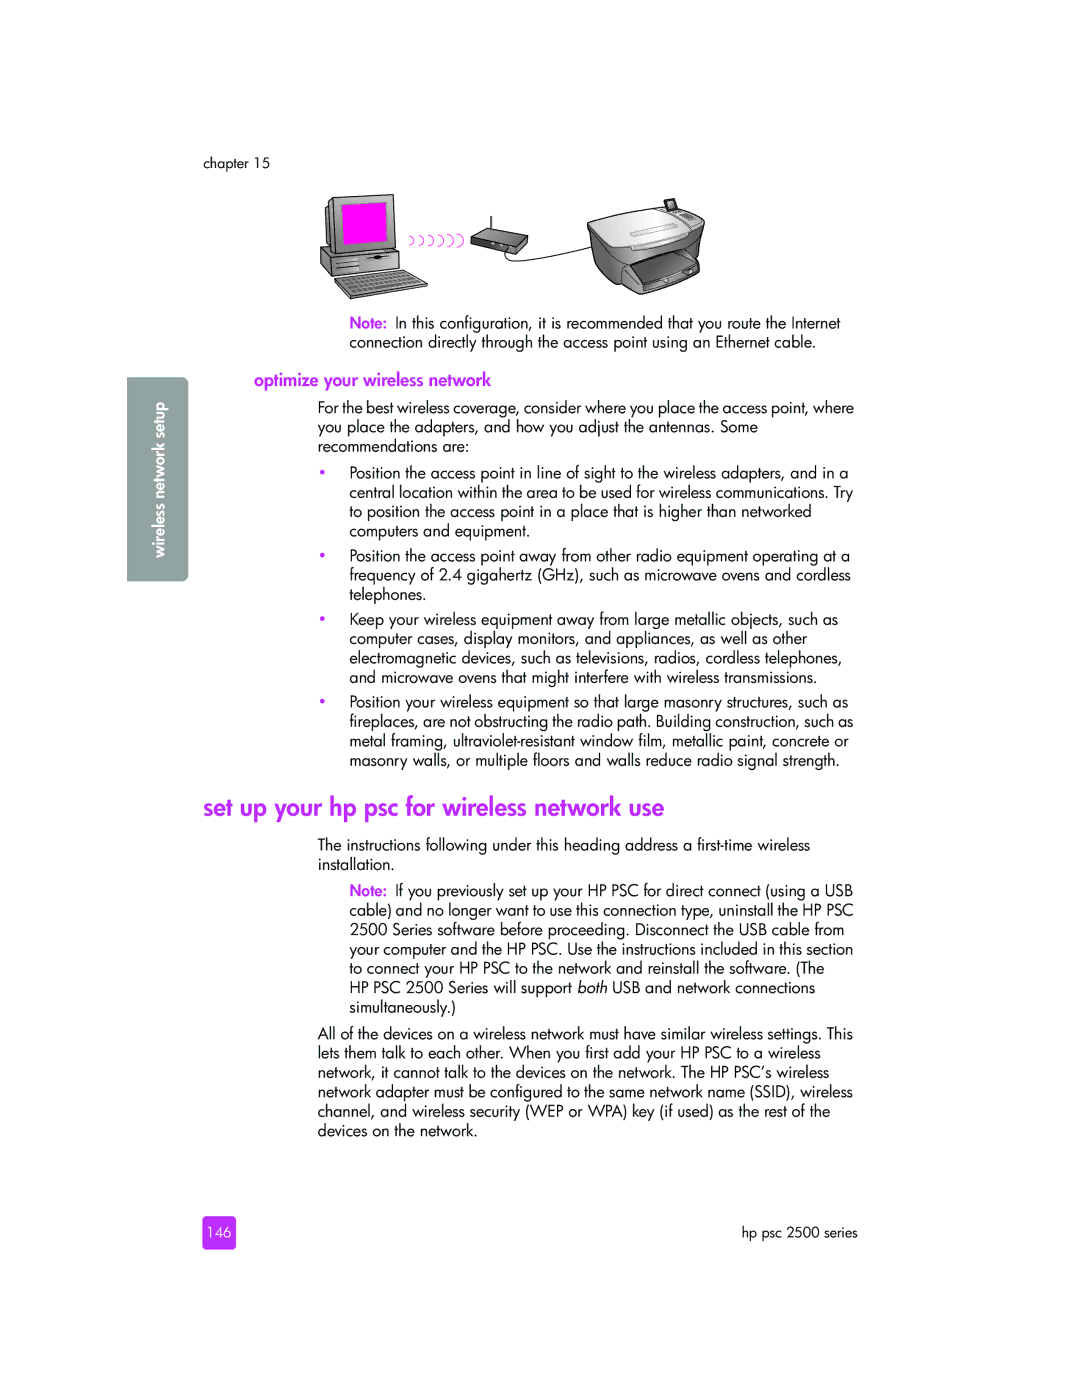 HP 2510xi manual Set up your hp psc for wireless network use, Optimize your wireless network, 146 